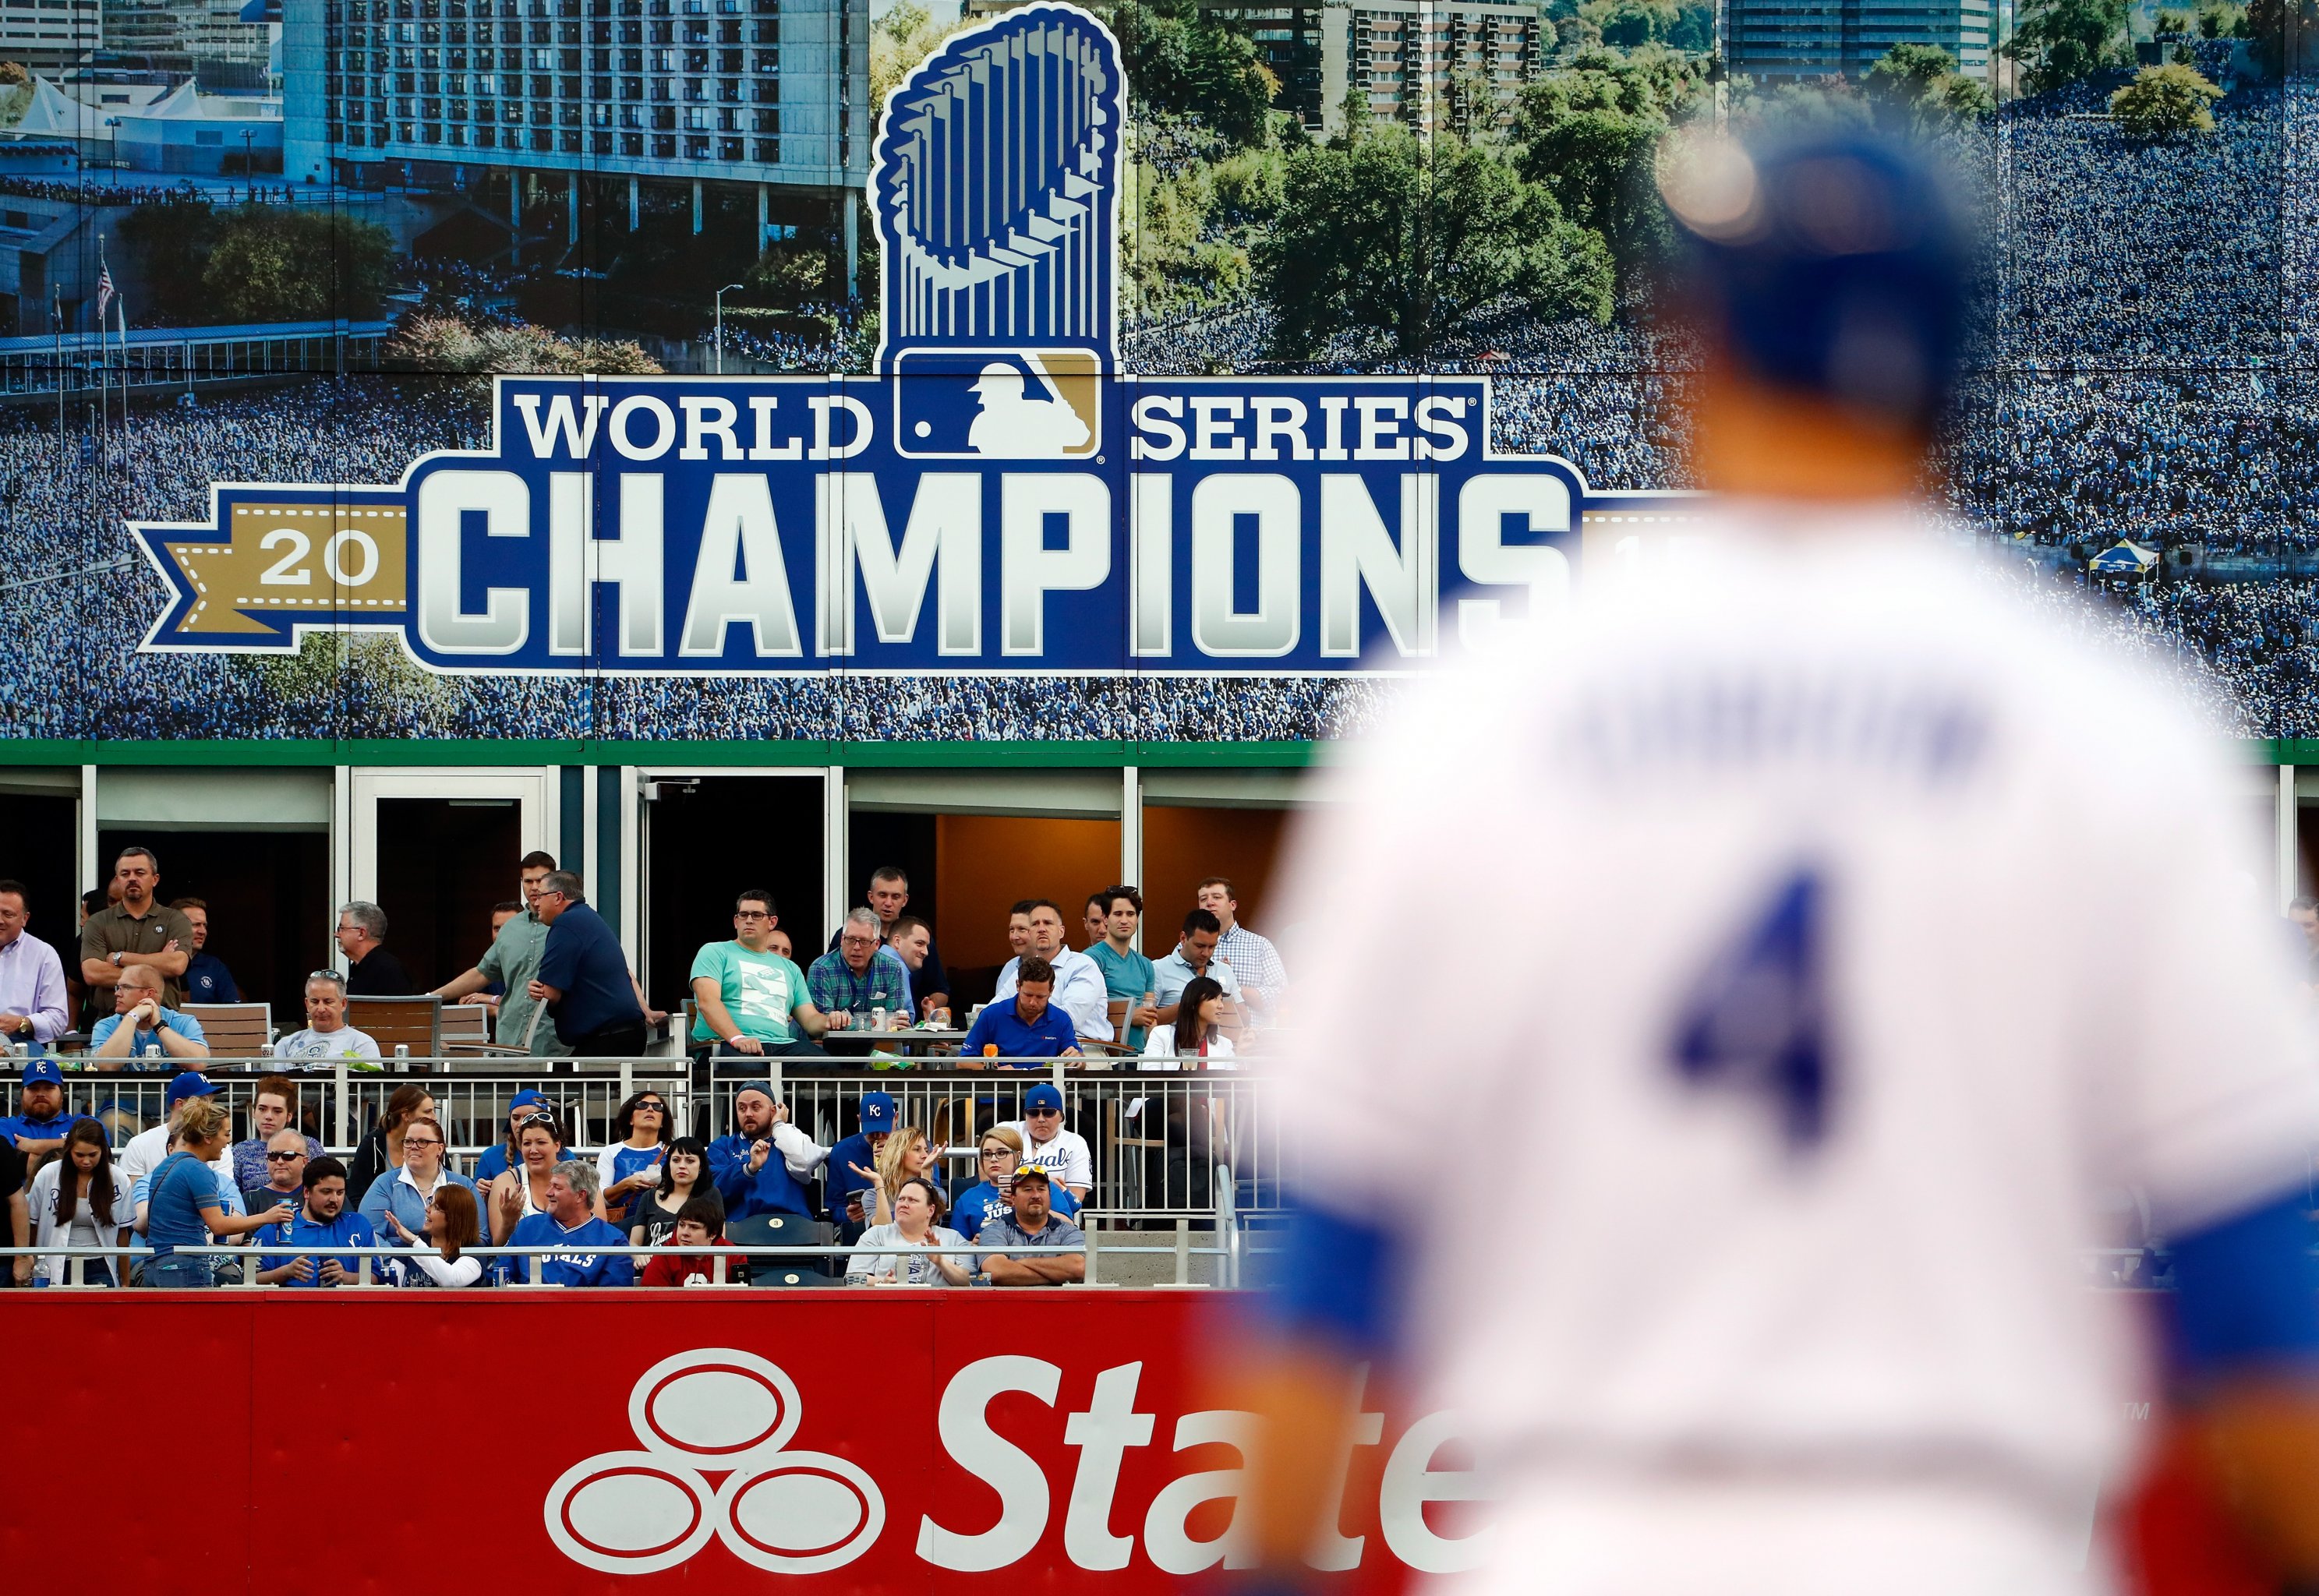 The Los Angeles Dodgers Are 2020 World Series Champions, by Nick Martinez